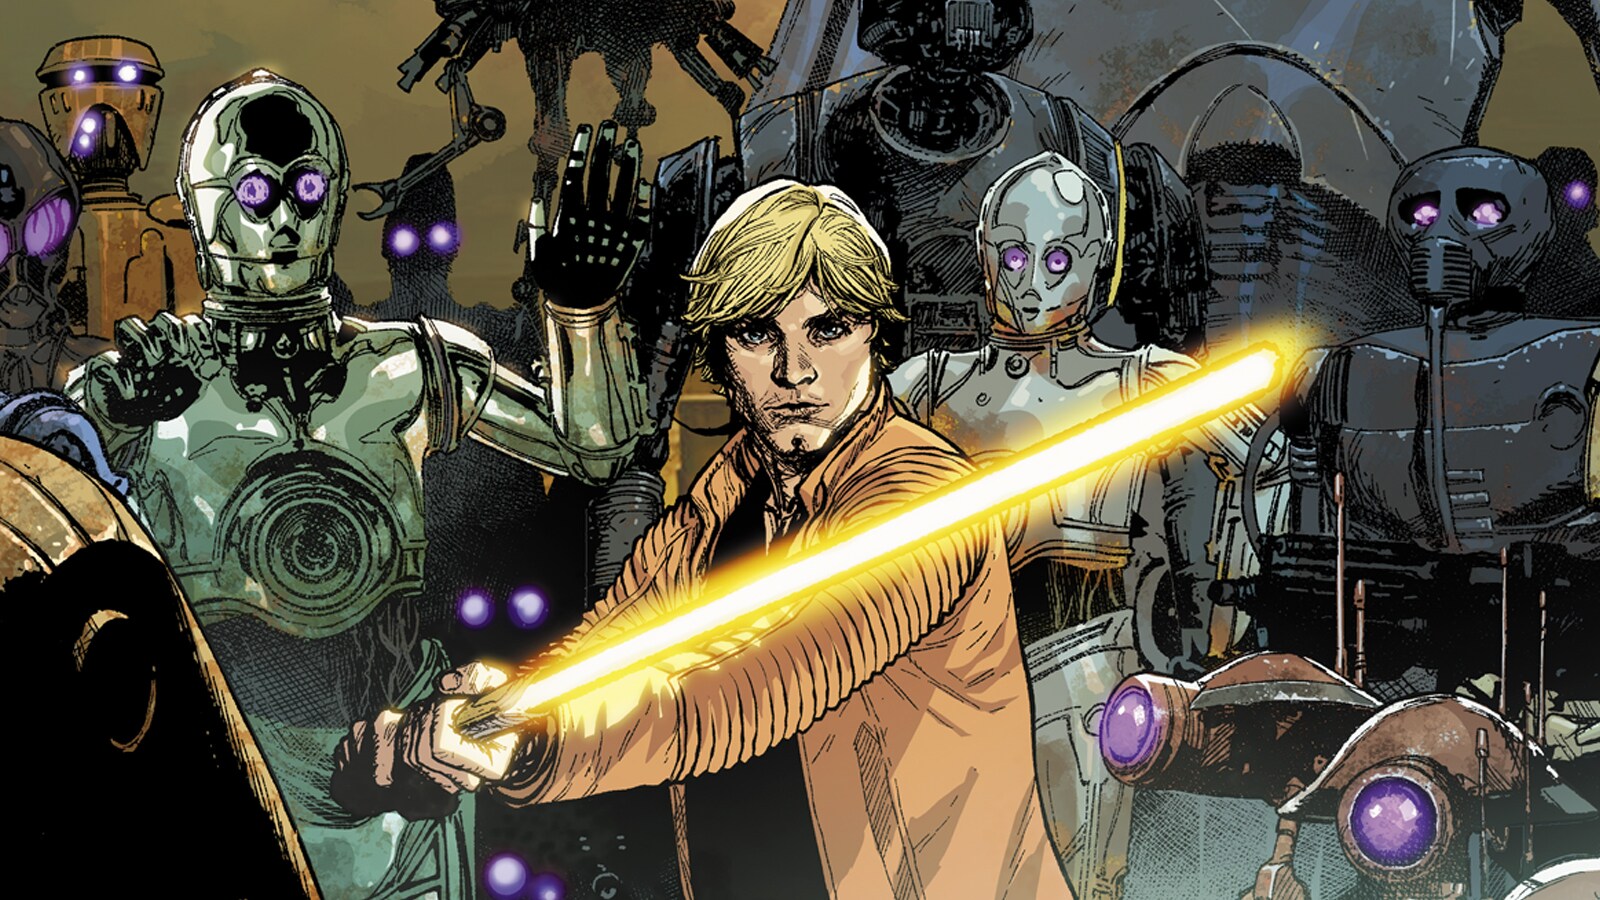 An Ancient Evil Awakens in Marvel’s Star Wars: Dark Droids #1 - Exclusive Preview